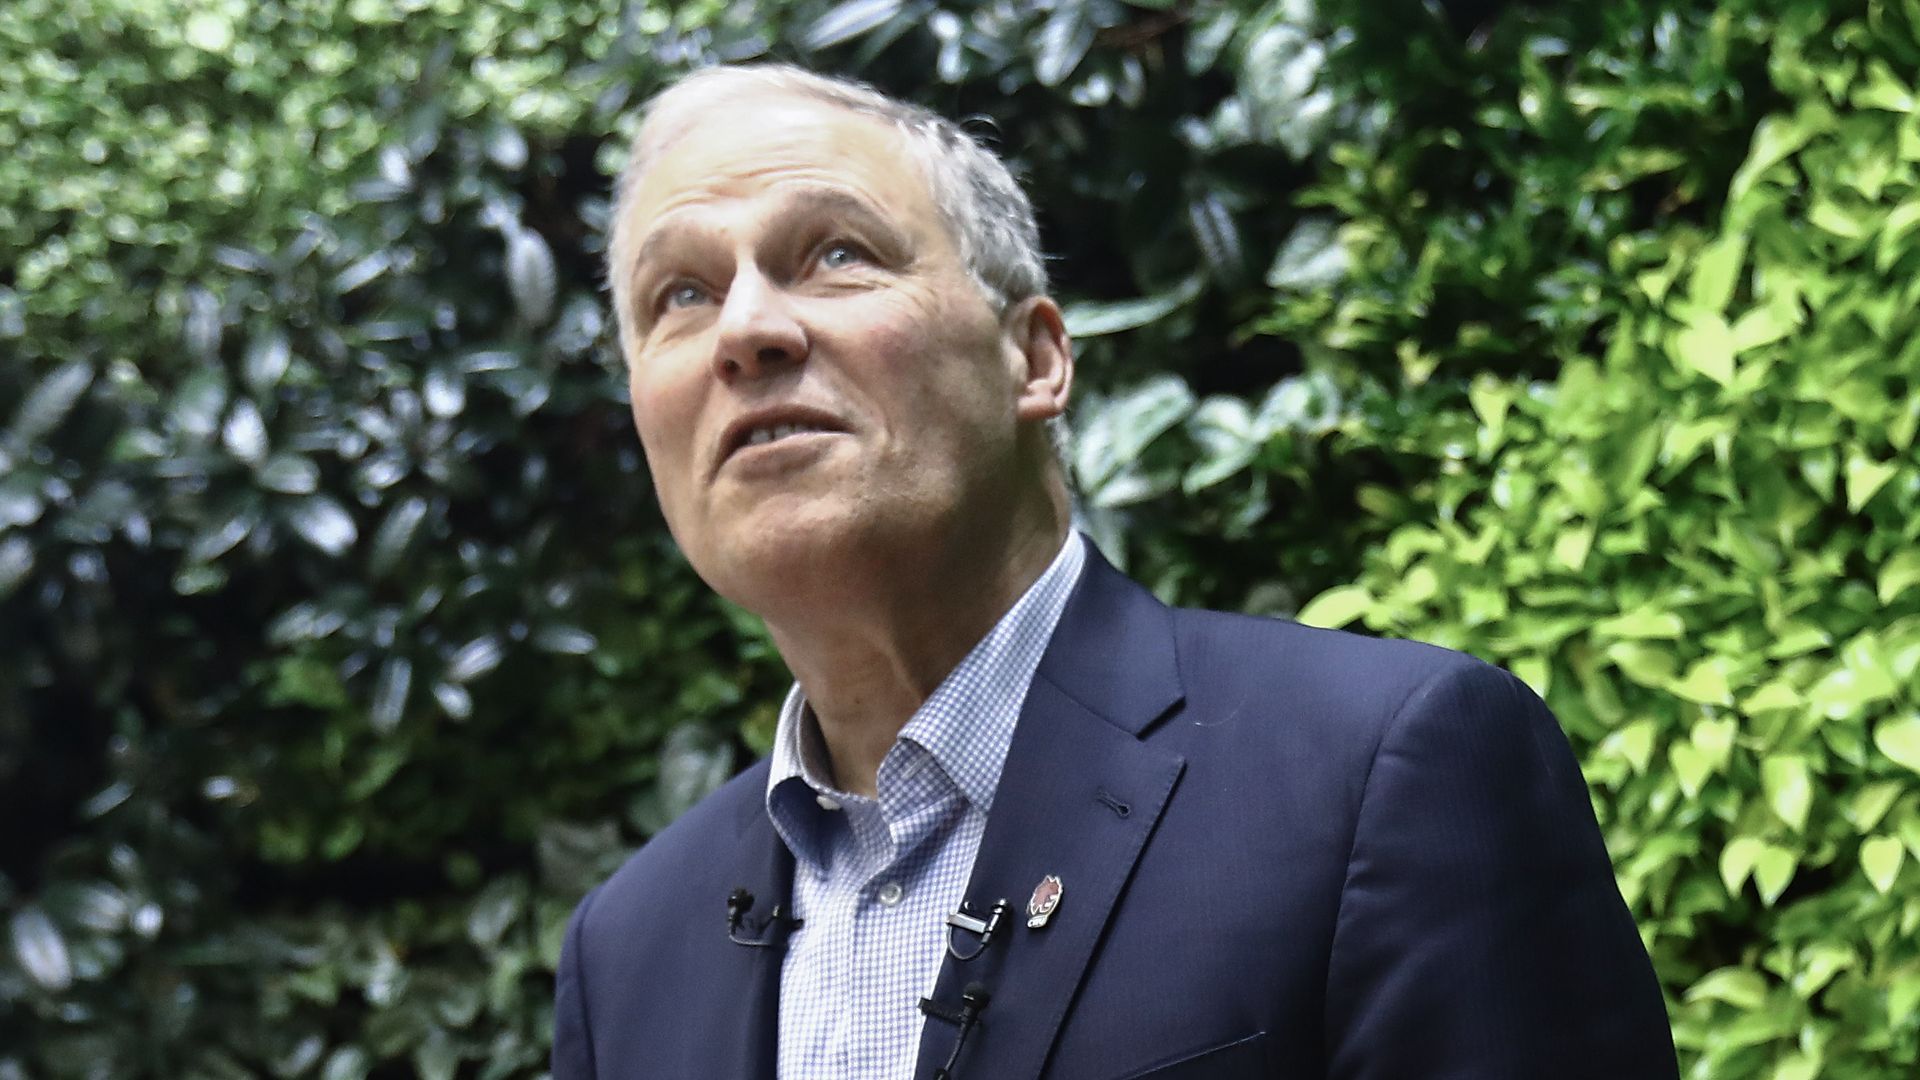  Democratic presidential candidate and Washington Governor Jay Inslee.